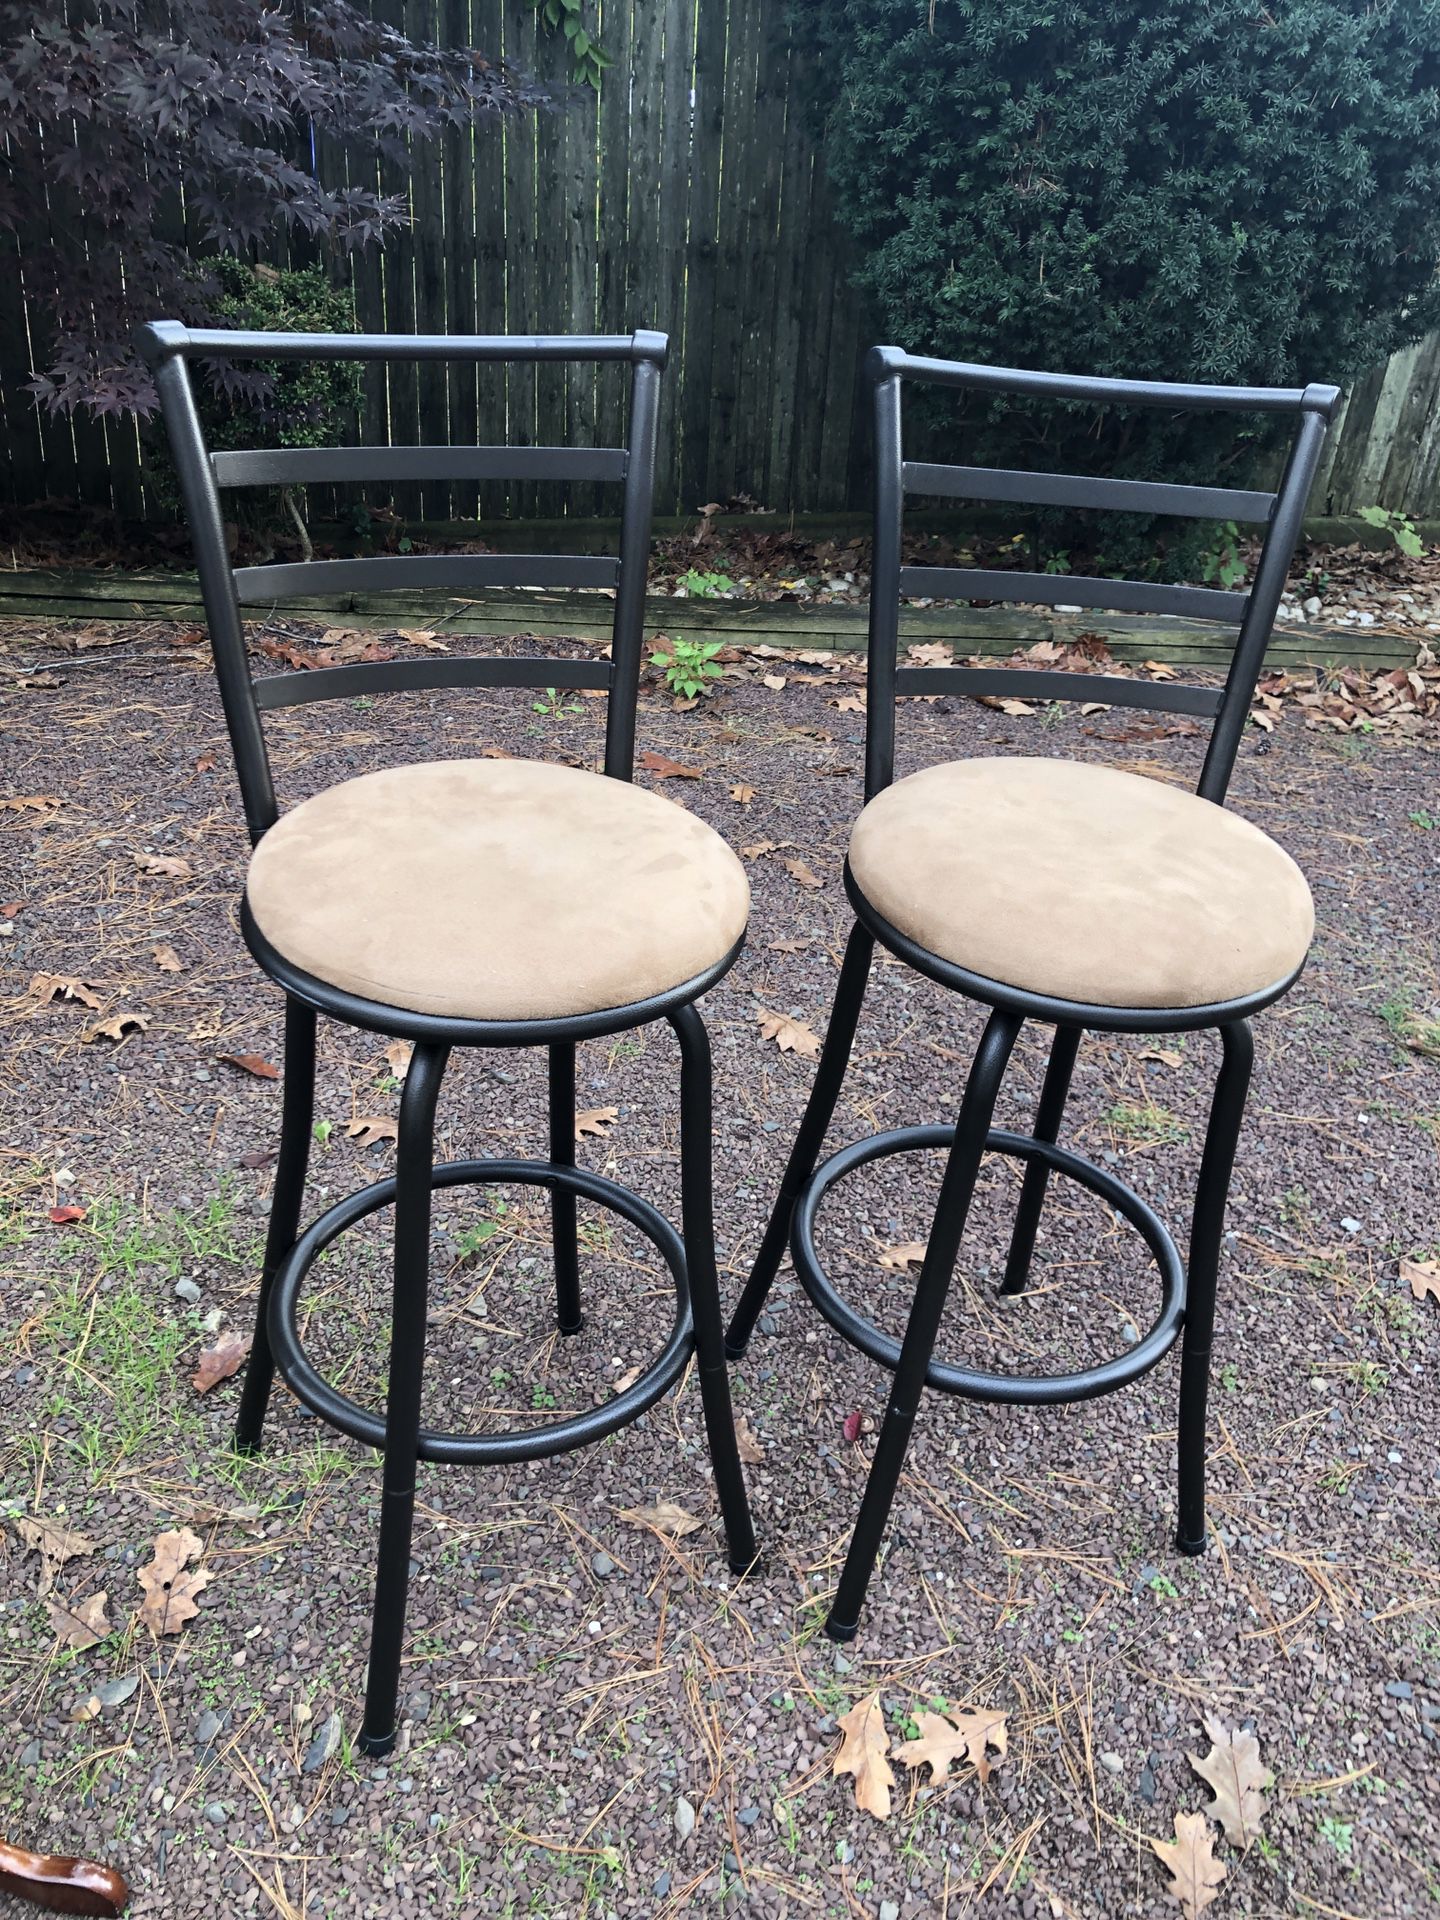 Two Metal Bar Stools Chair